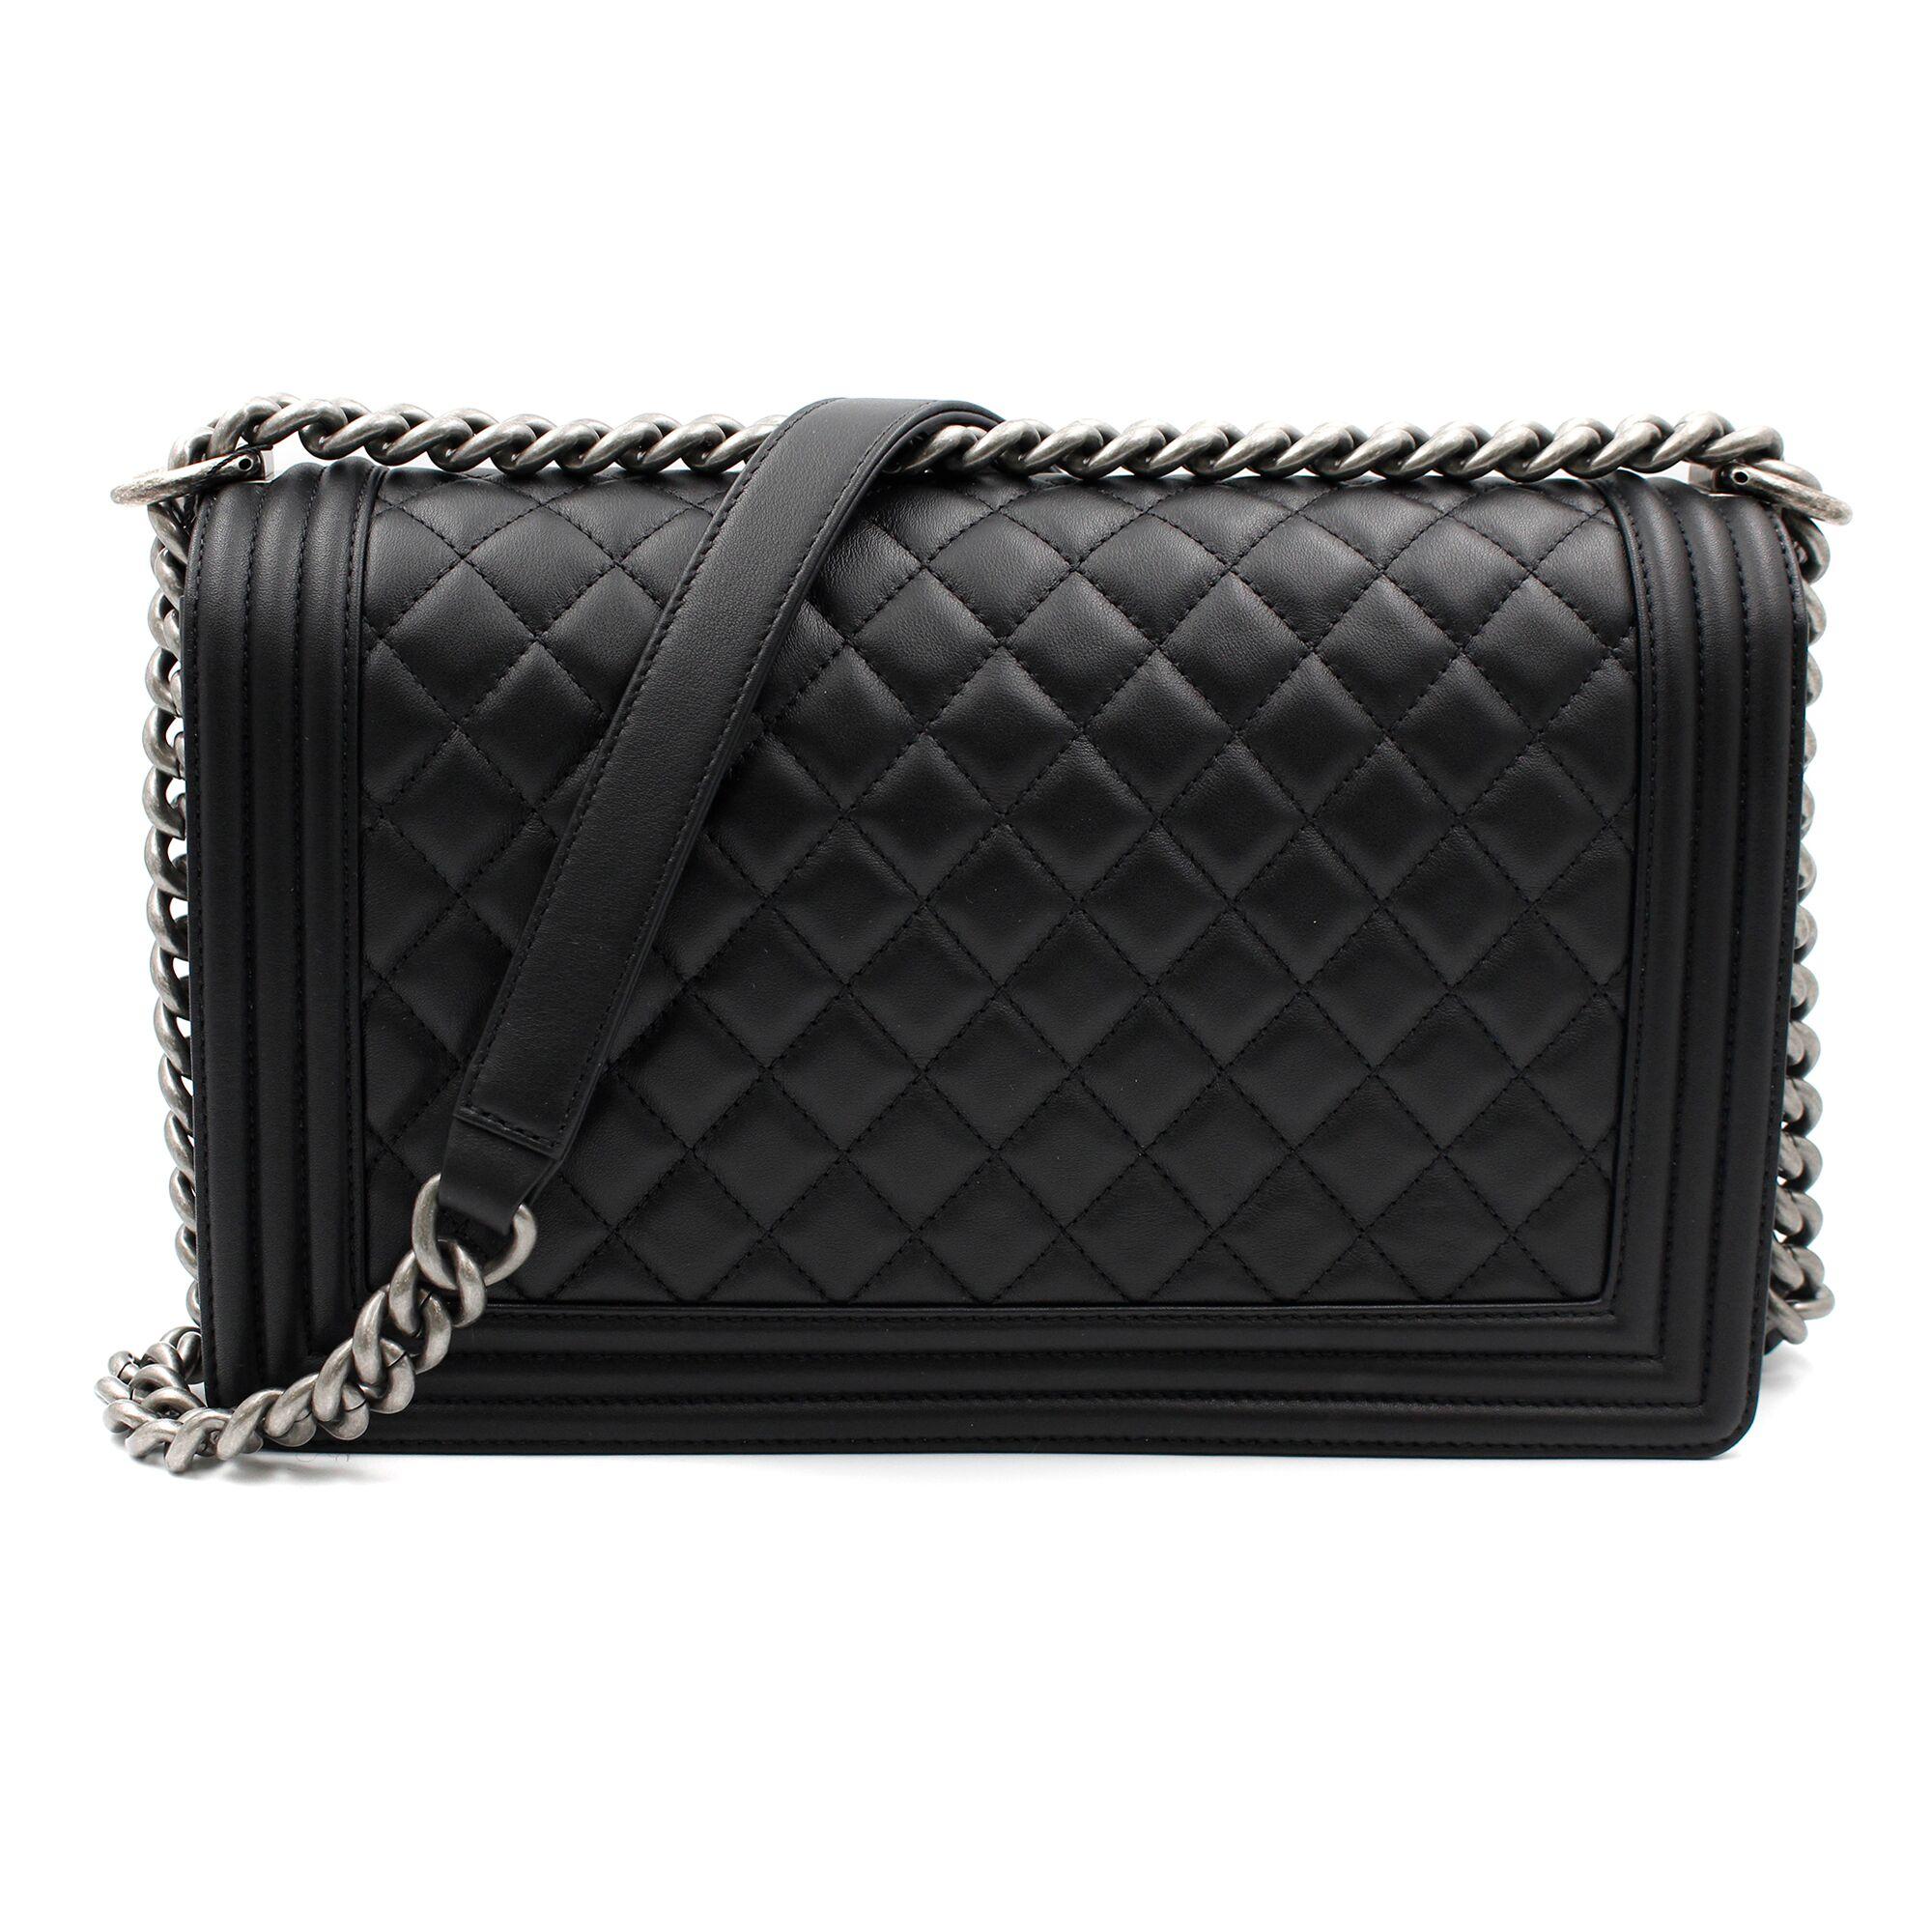 New Chanel Quilted Large Boy Flap Bag in black calfskin with ruthenium-finish hardware. This bag features a front flap with the Boy signature CC push lock closure and an adjustable interwoven ruthenium-finish chain link with black leather